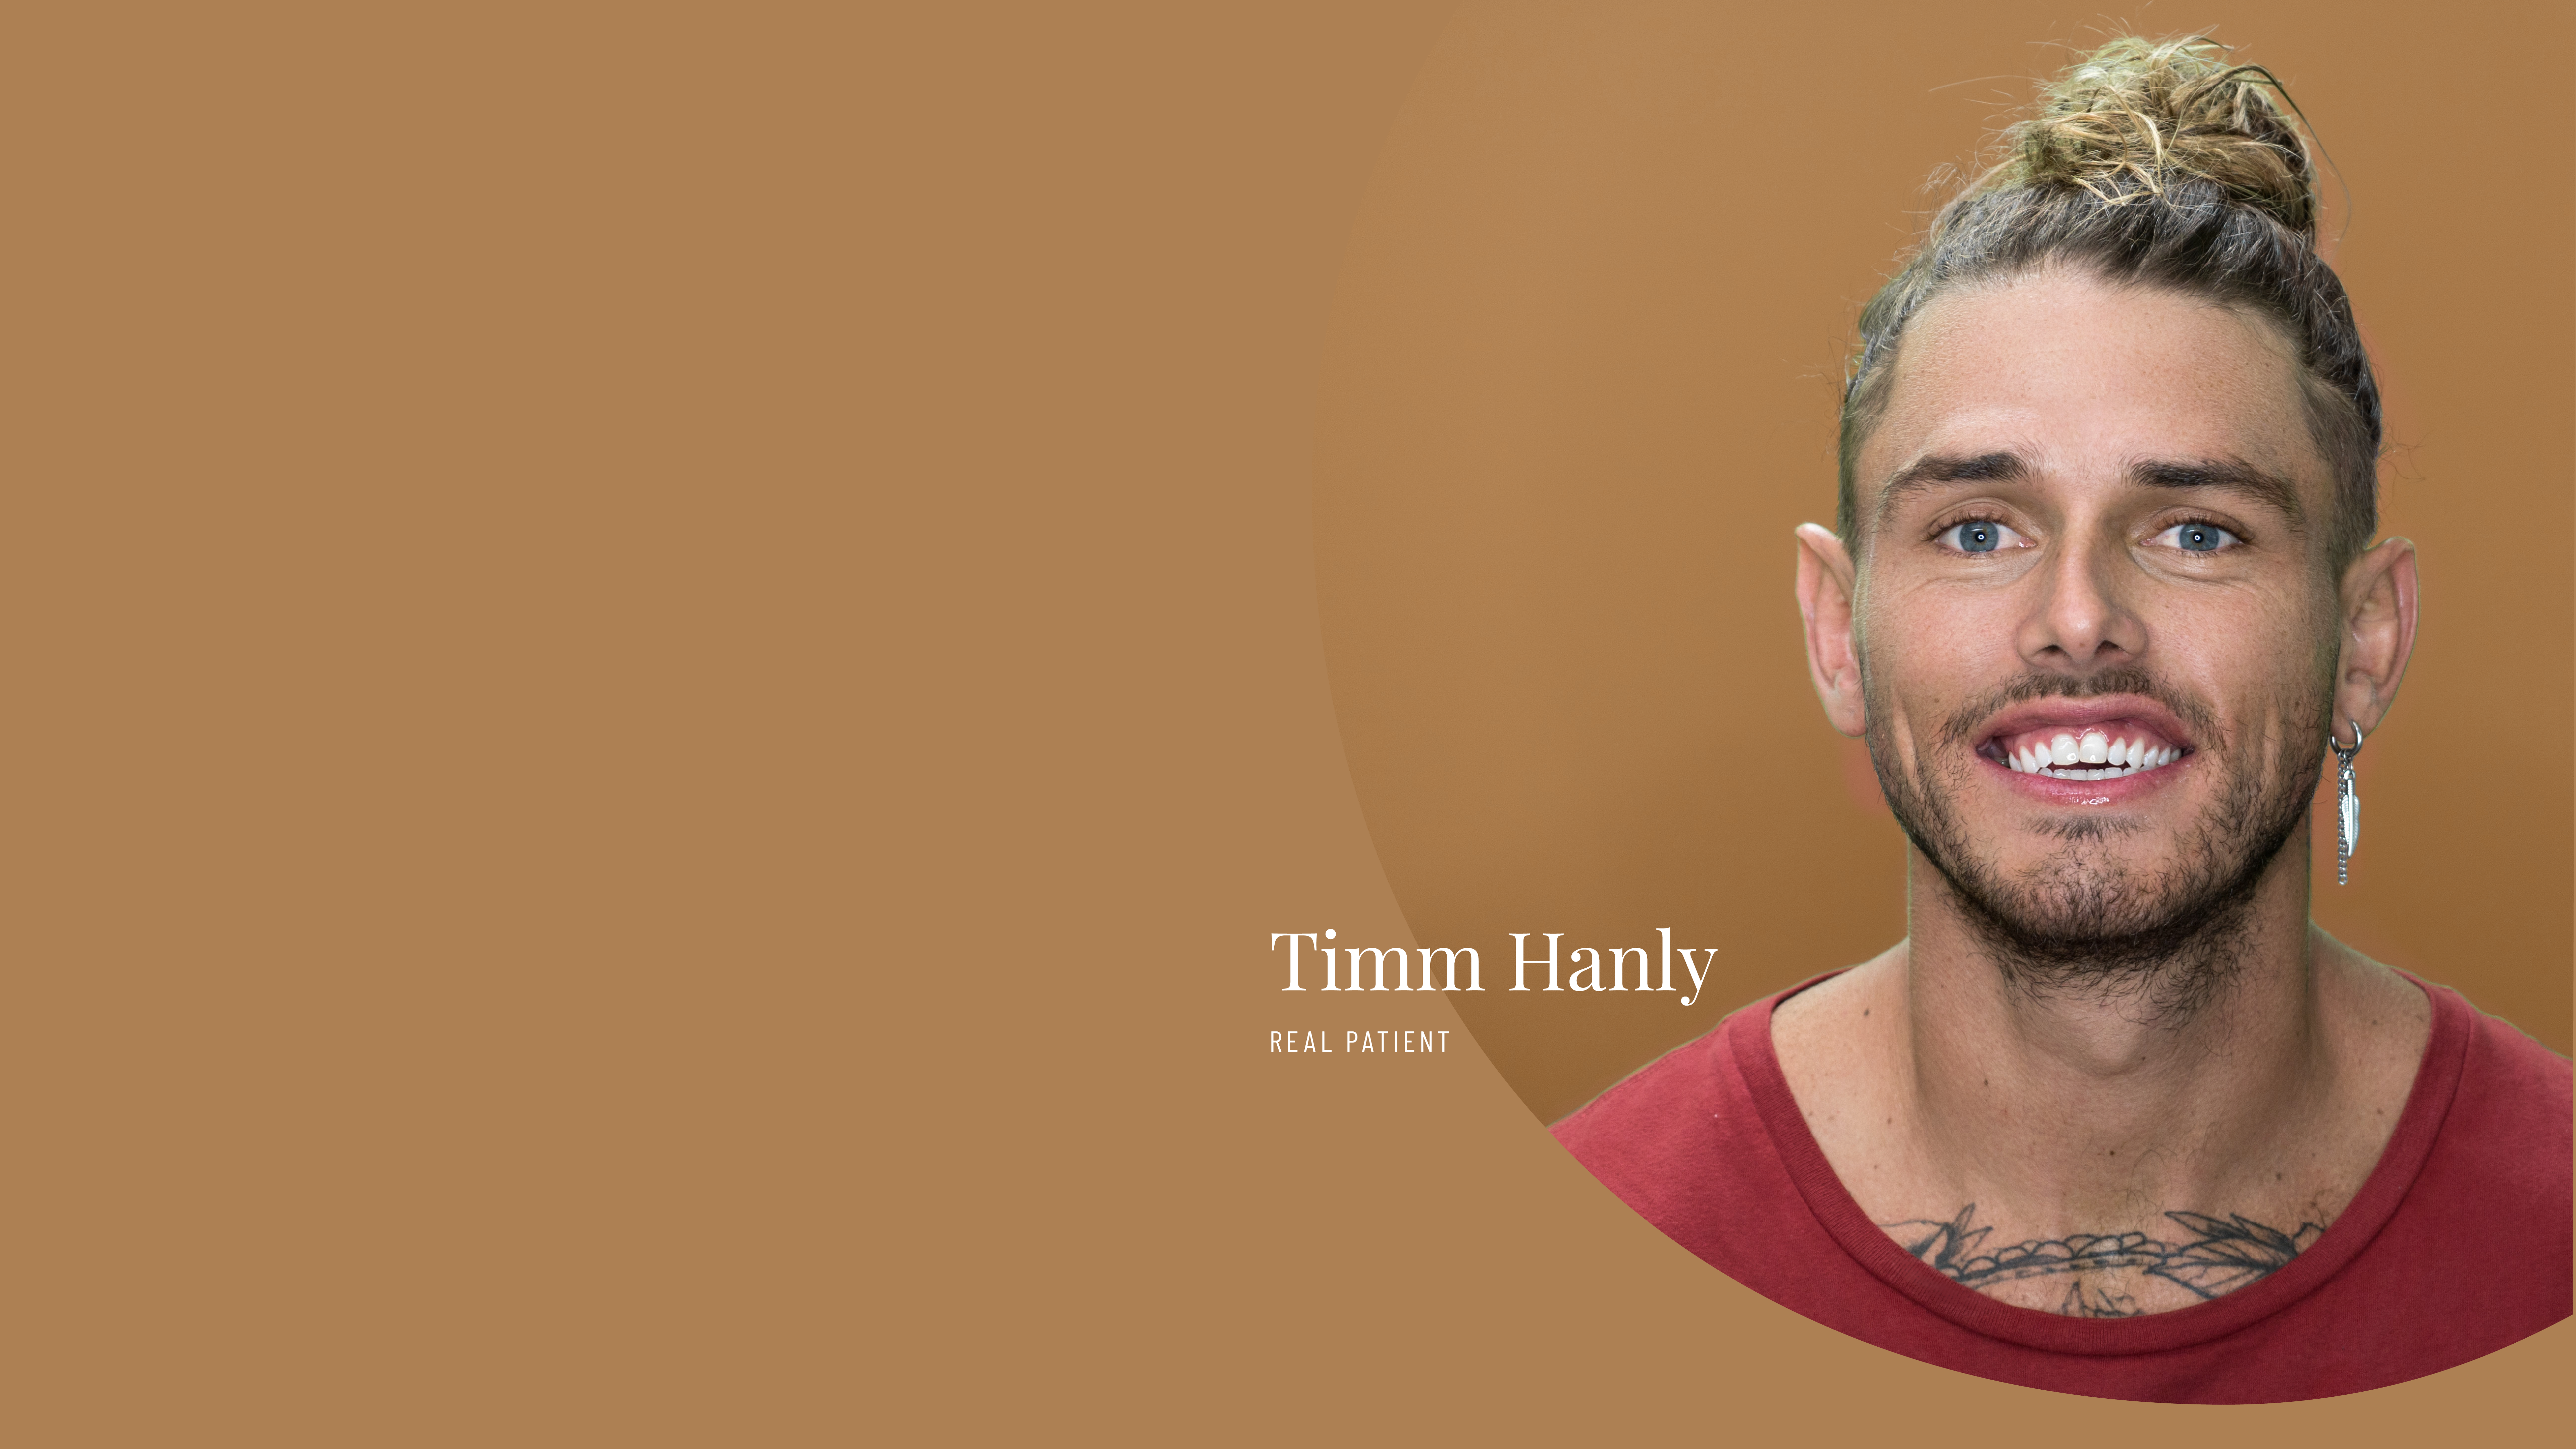 Timm Hanly from The Bachelorette became a Vogue Dental Studios patient for his regular checkups.